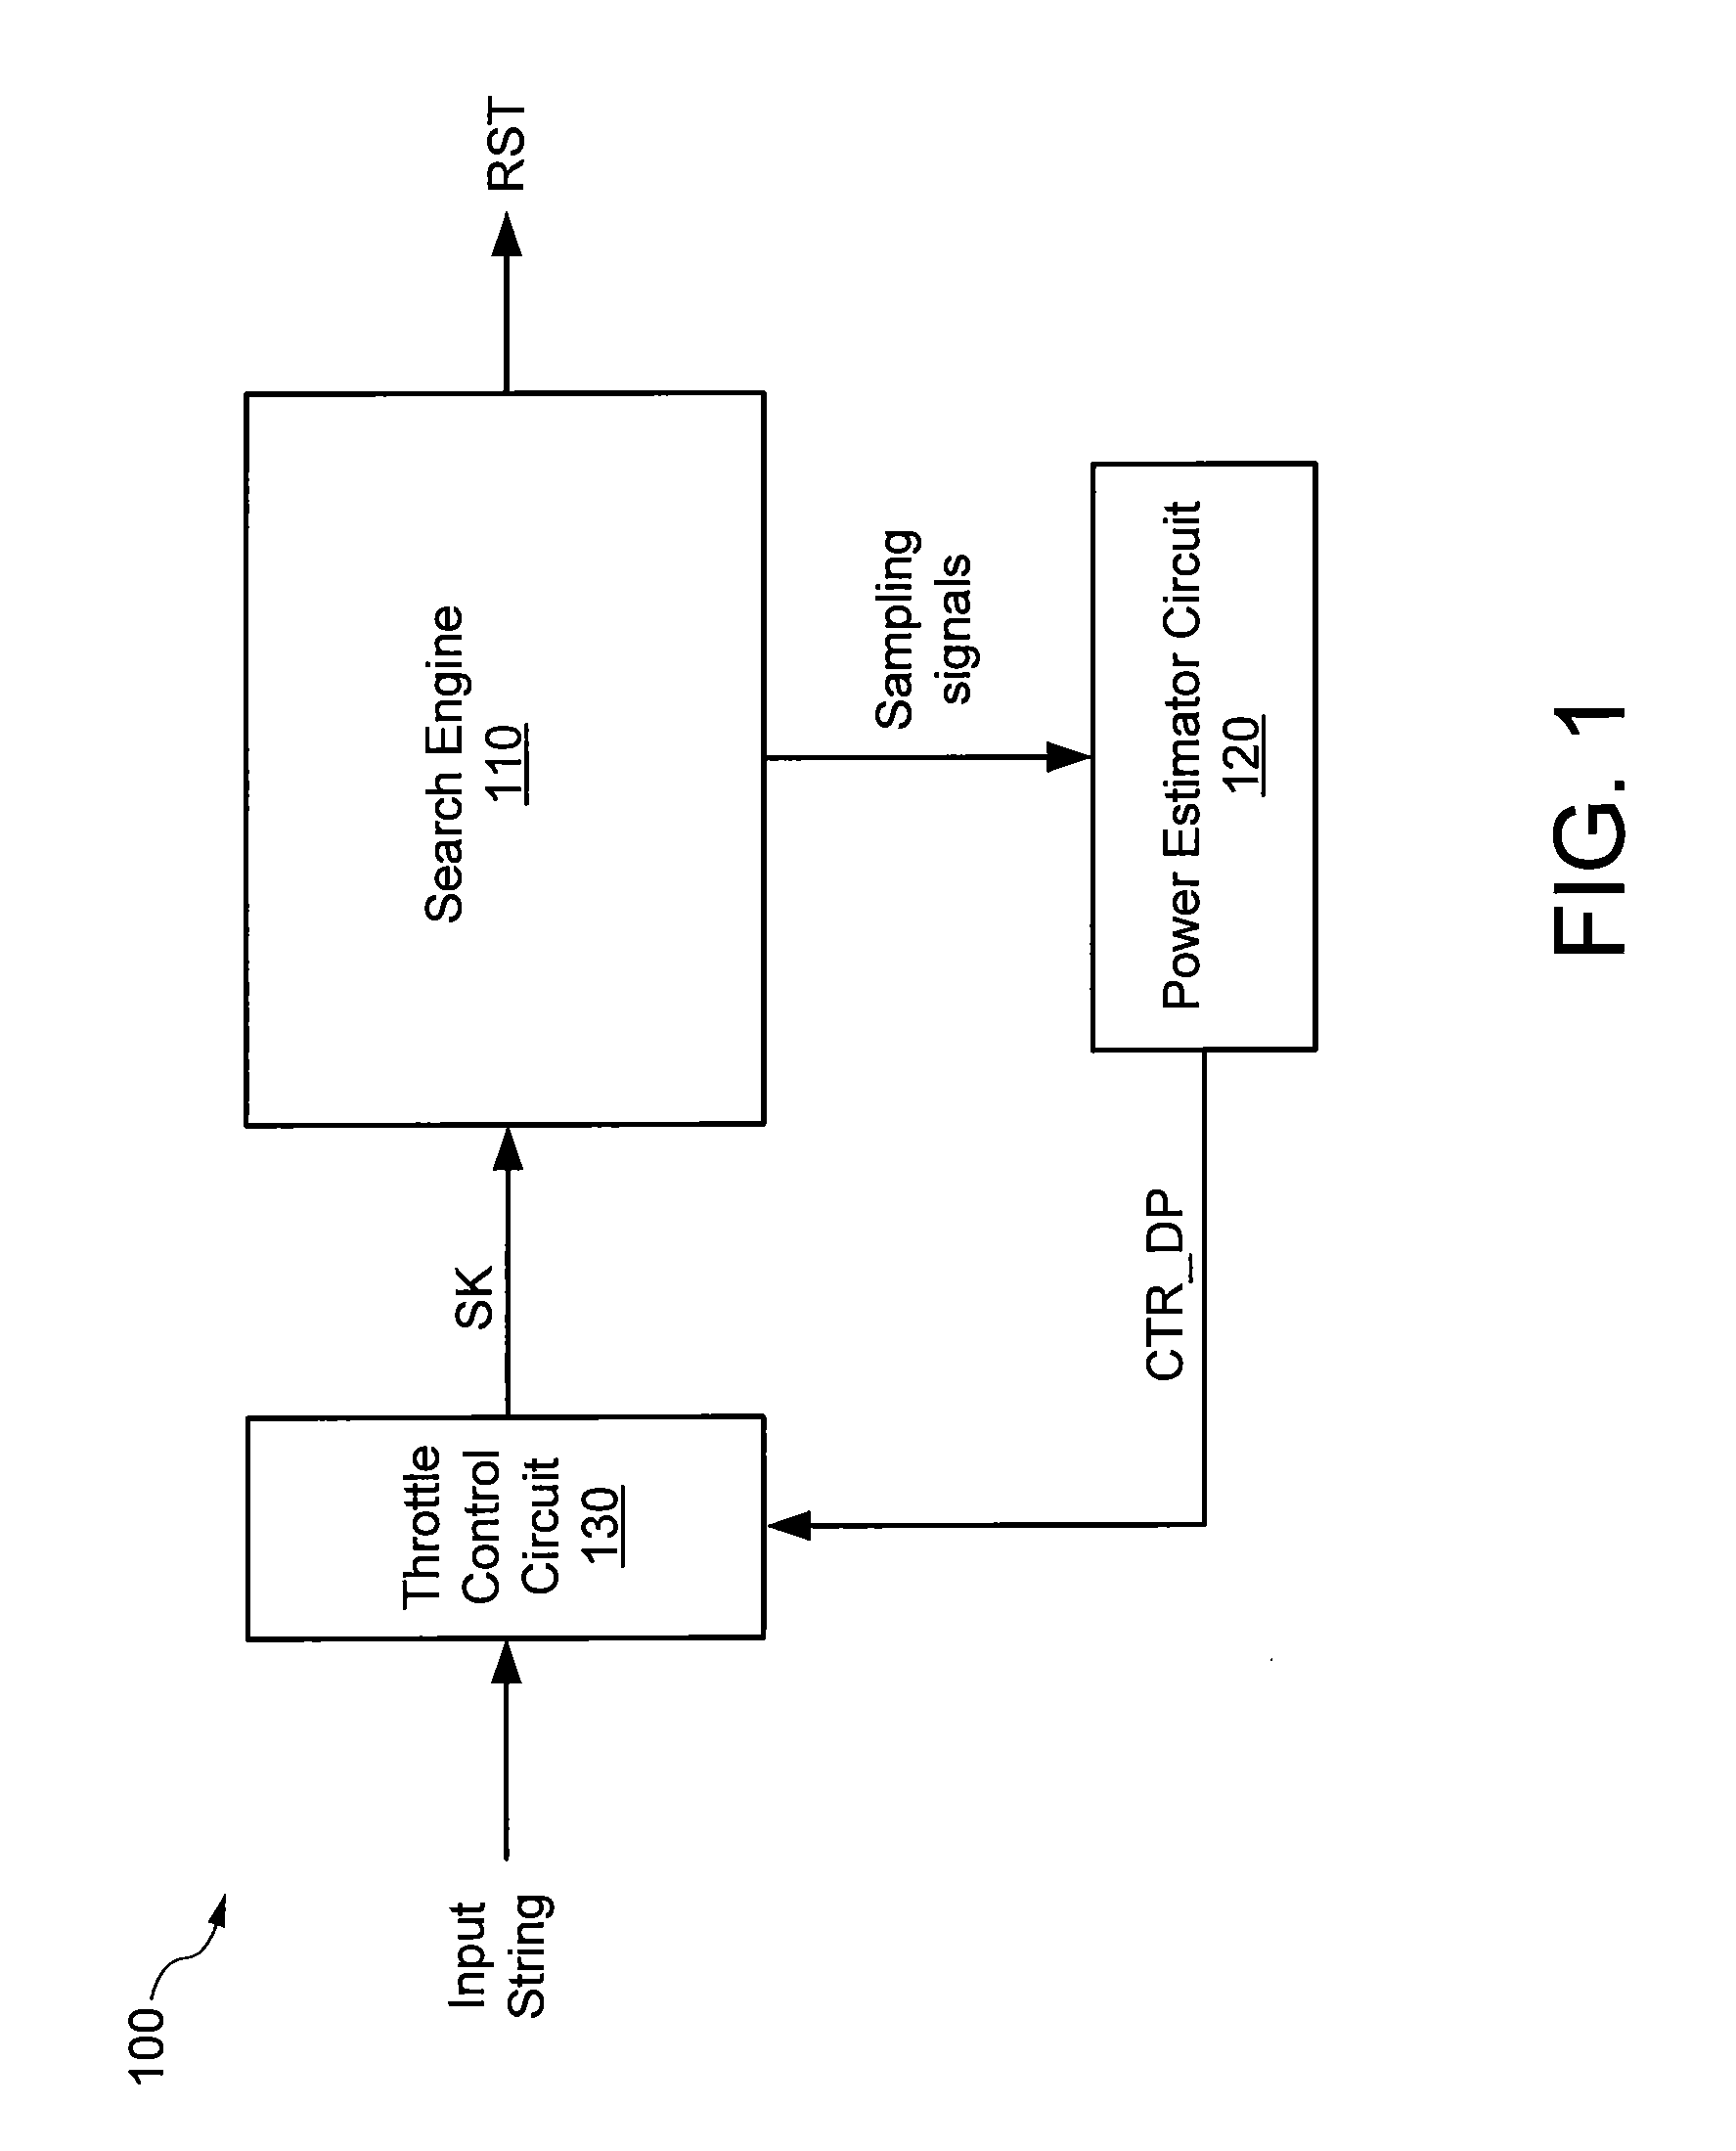 System for Dynamically Managing Power Consumption in a Search Engine